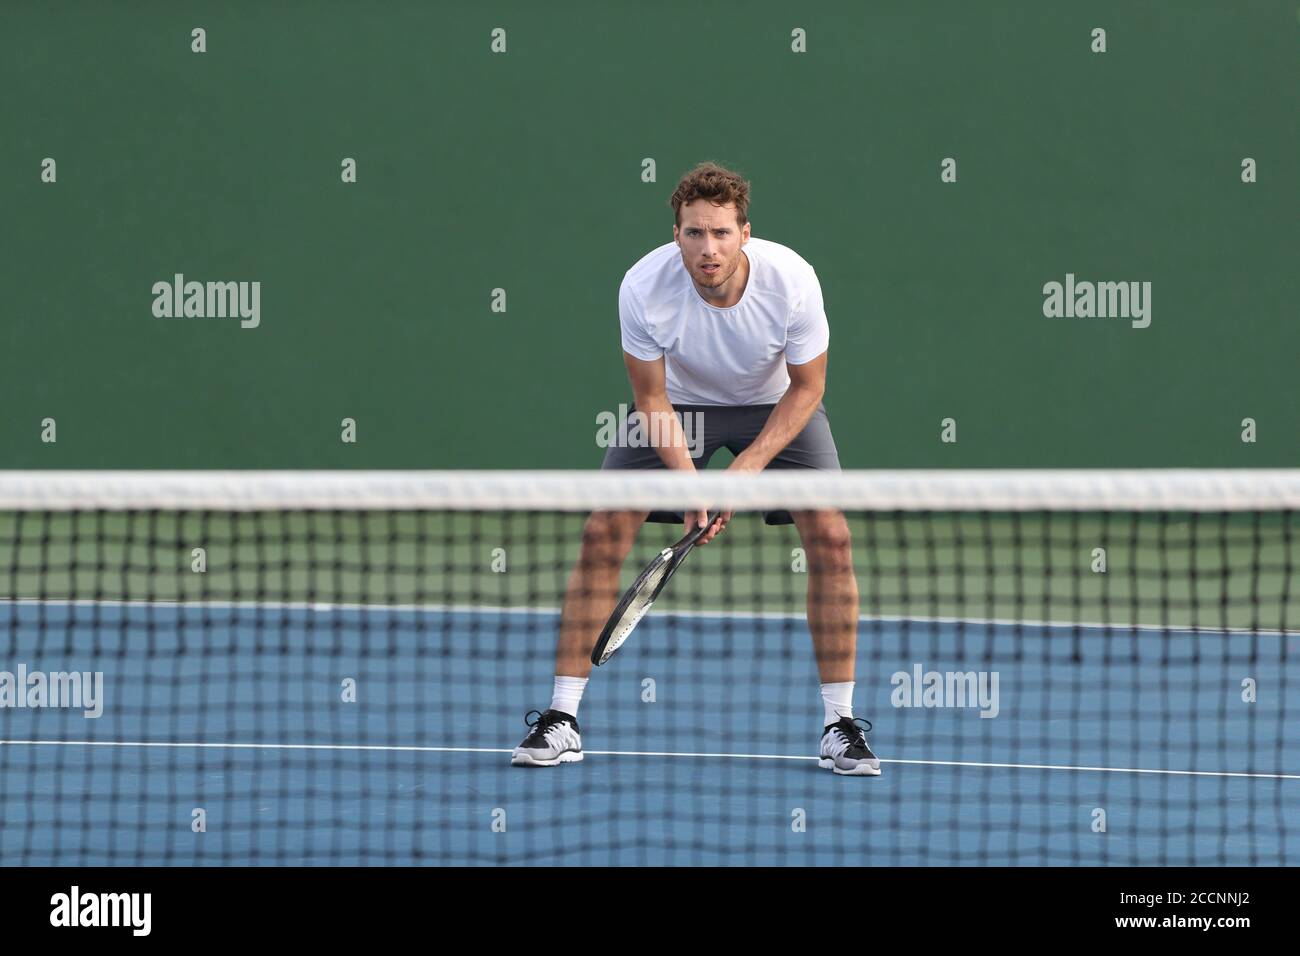 Professional tennis player man athlete waiting to receive ball, playing game on hard court. Fitness person focused behind net ready to return training Stock Photo